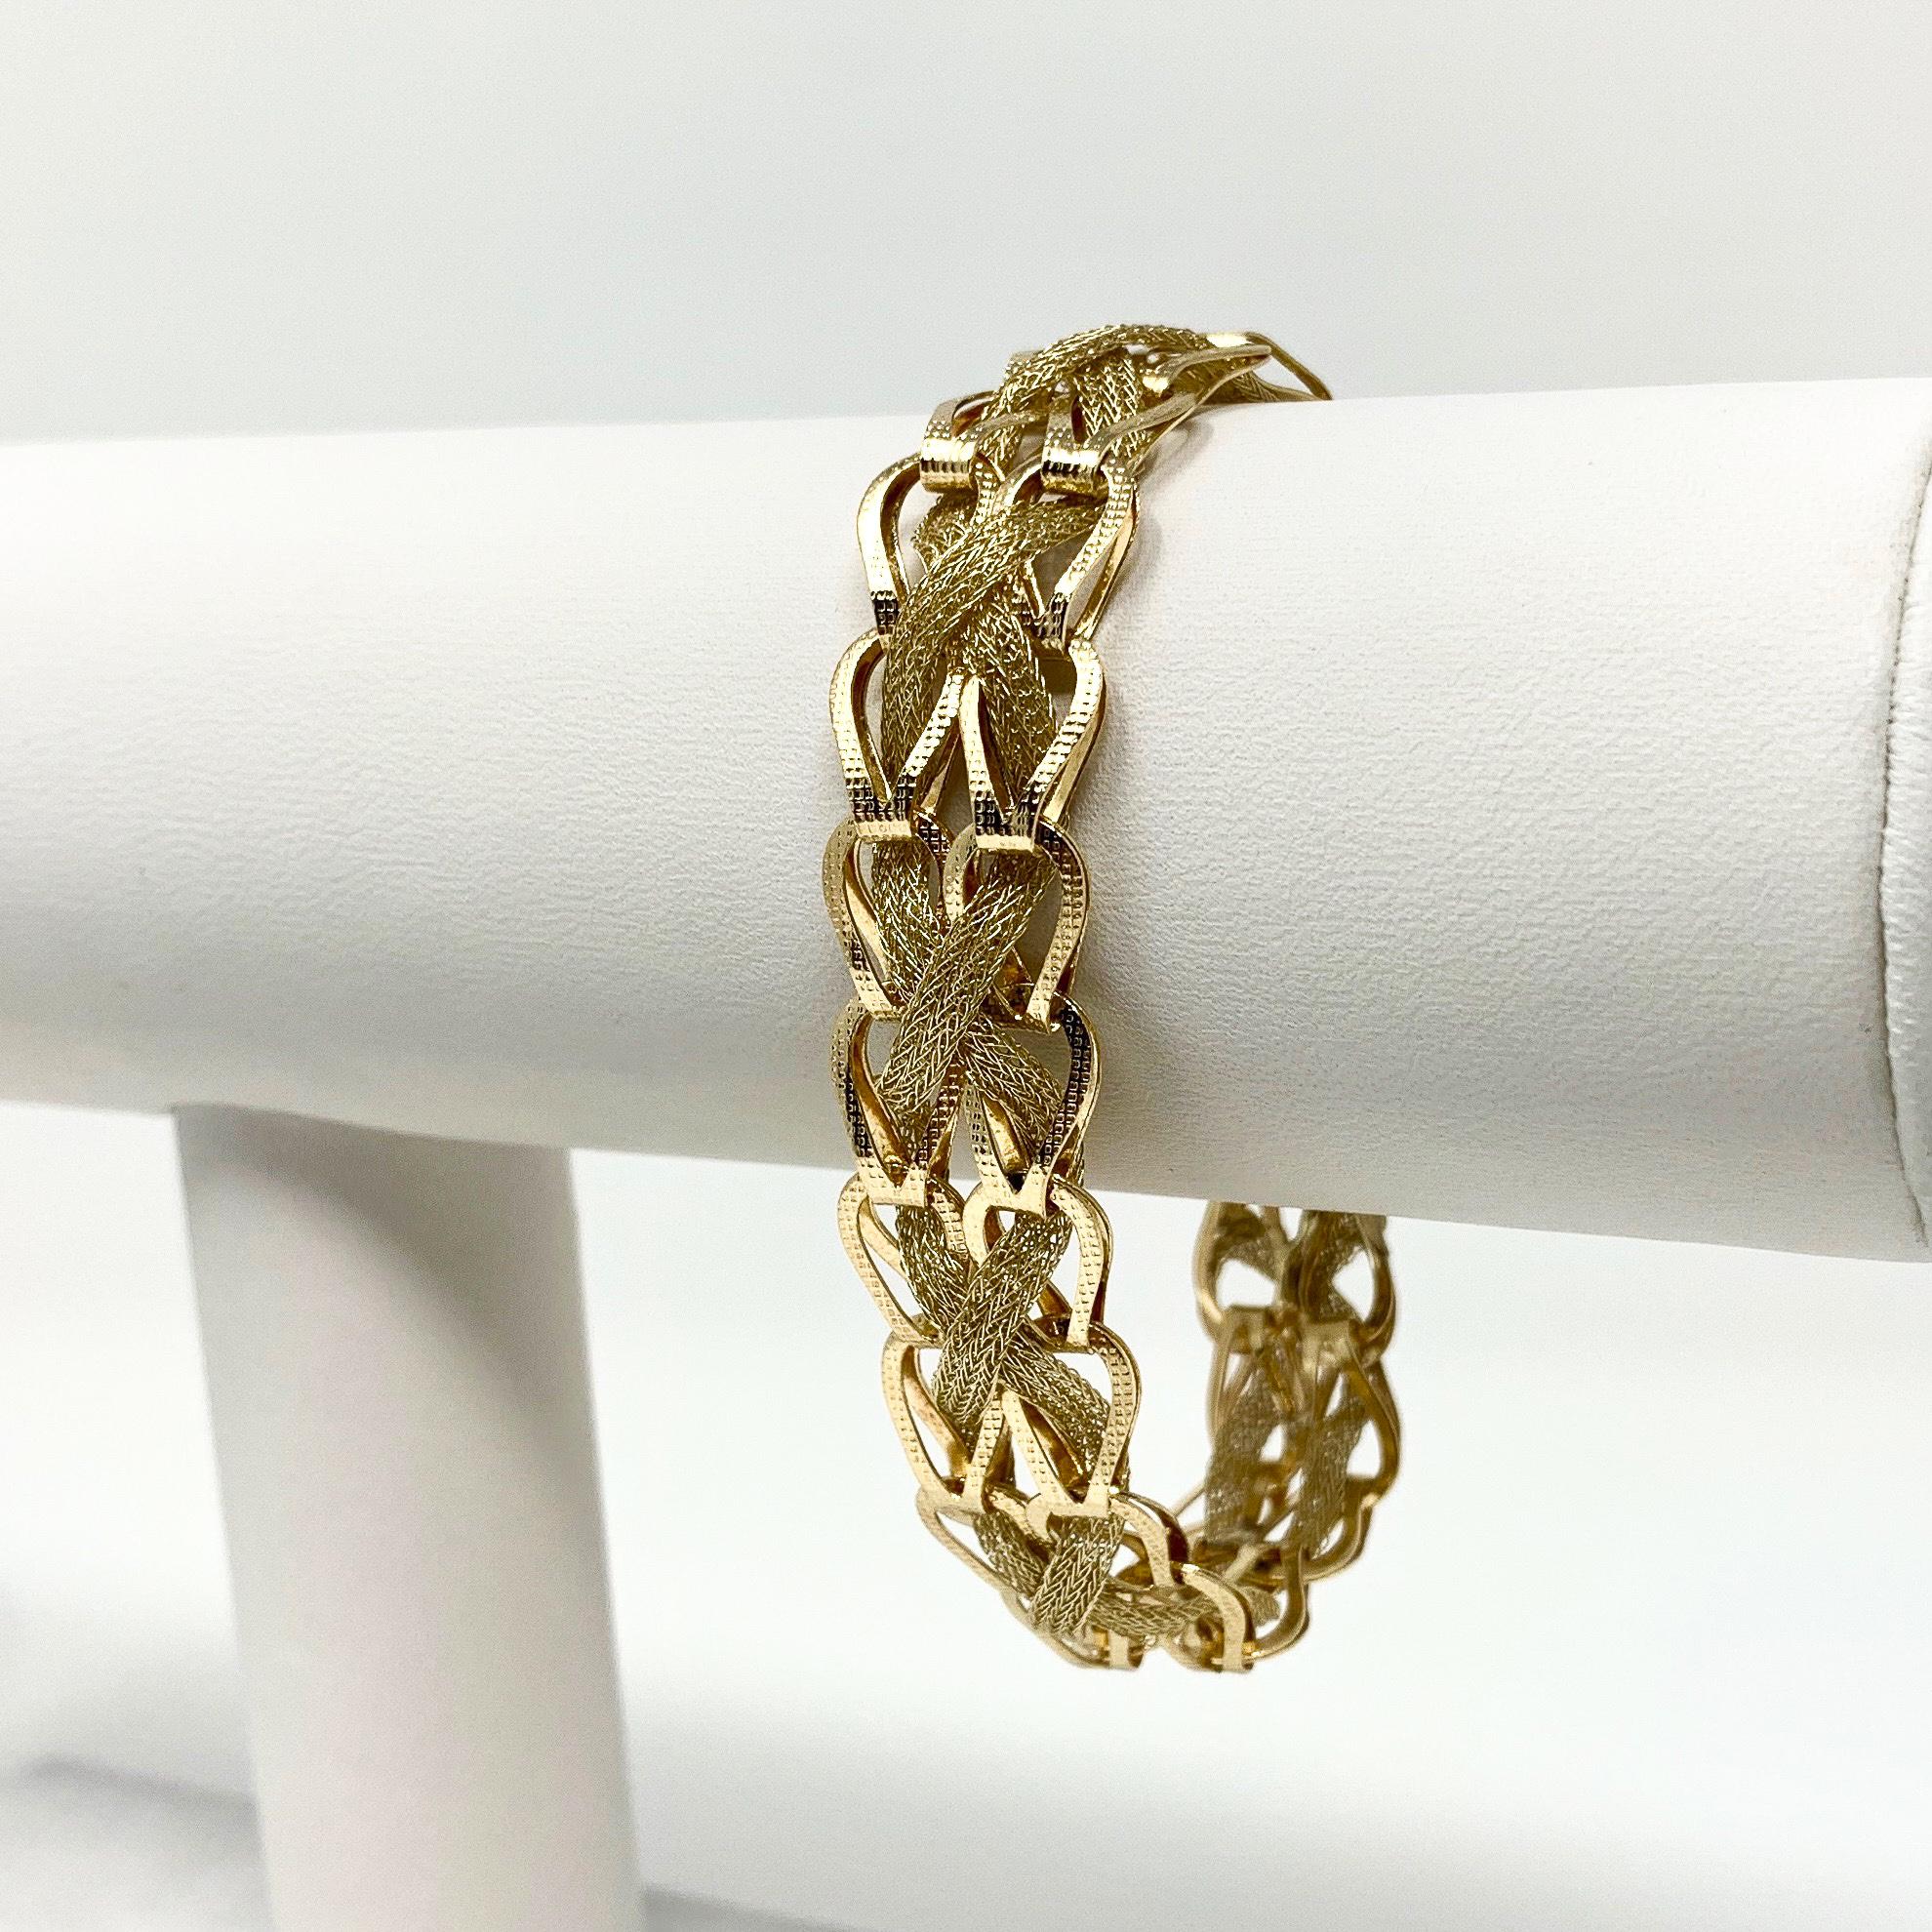 14k Yellow Gold 14.4g Fancy Mesh Weave 13mm Link Bracelet 7 Inches

Condition:  Excellent (Professionally Cleaned and Polished)
Metal:  14k Gold (Marked, and Professionally Tested)
Weight:  14.4g
Length:  7 Inches
Width:  13mm 
Closure:  Box Tab